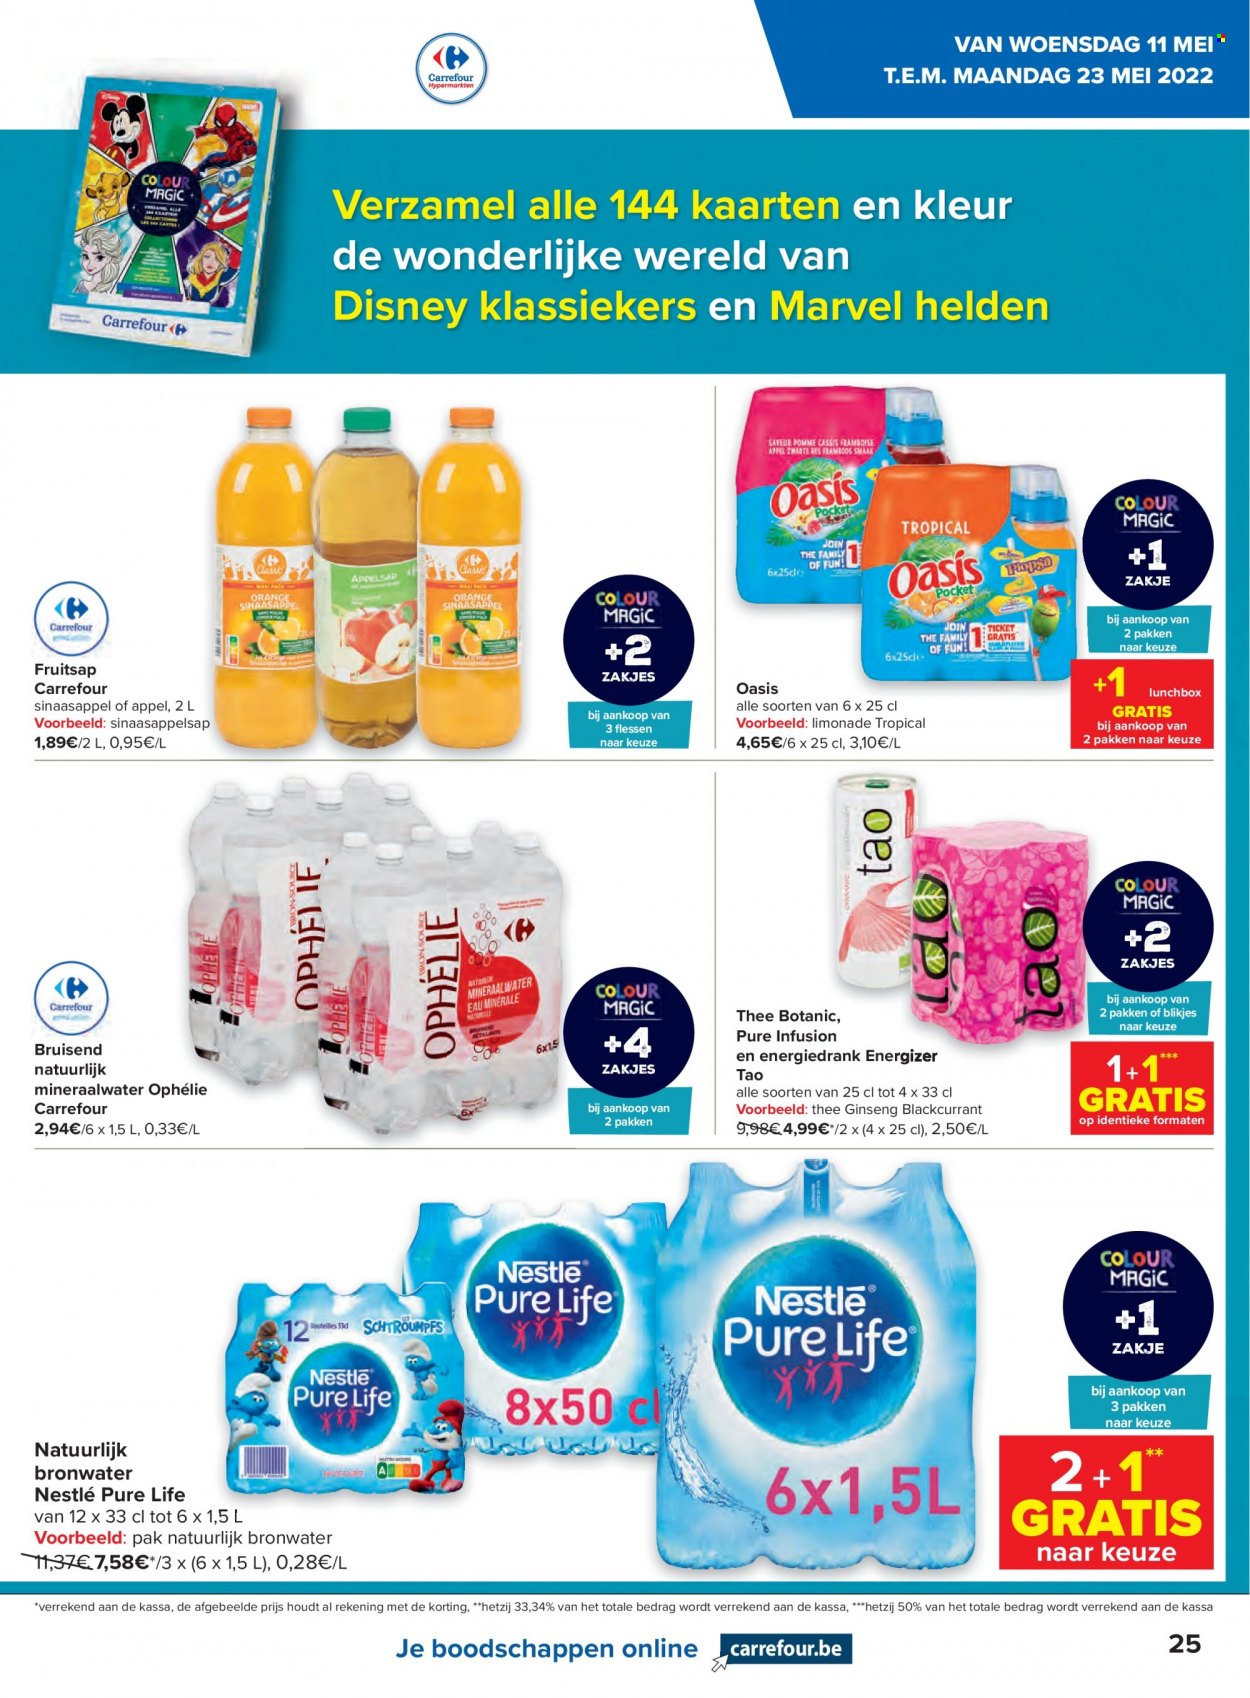 Catalogue Carrefour hypermarkt - 11.5.2022 - 23.5.2022. Page 25.